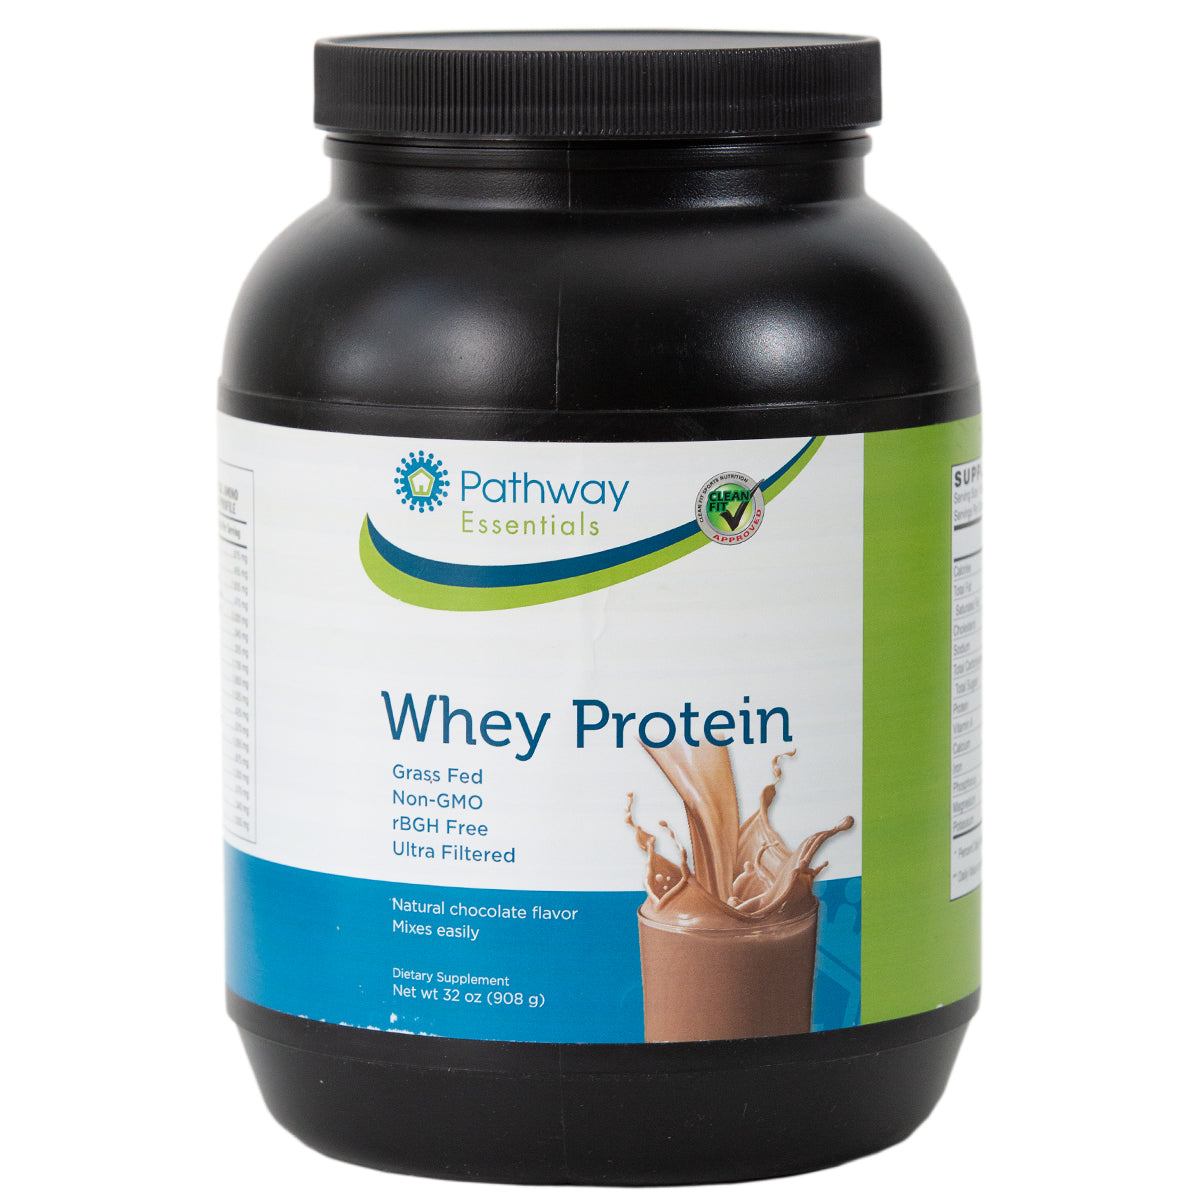 Whey Protein Chocolate Large - My Village Green